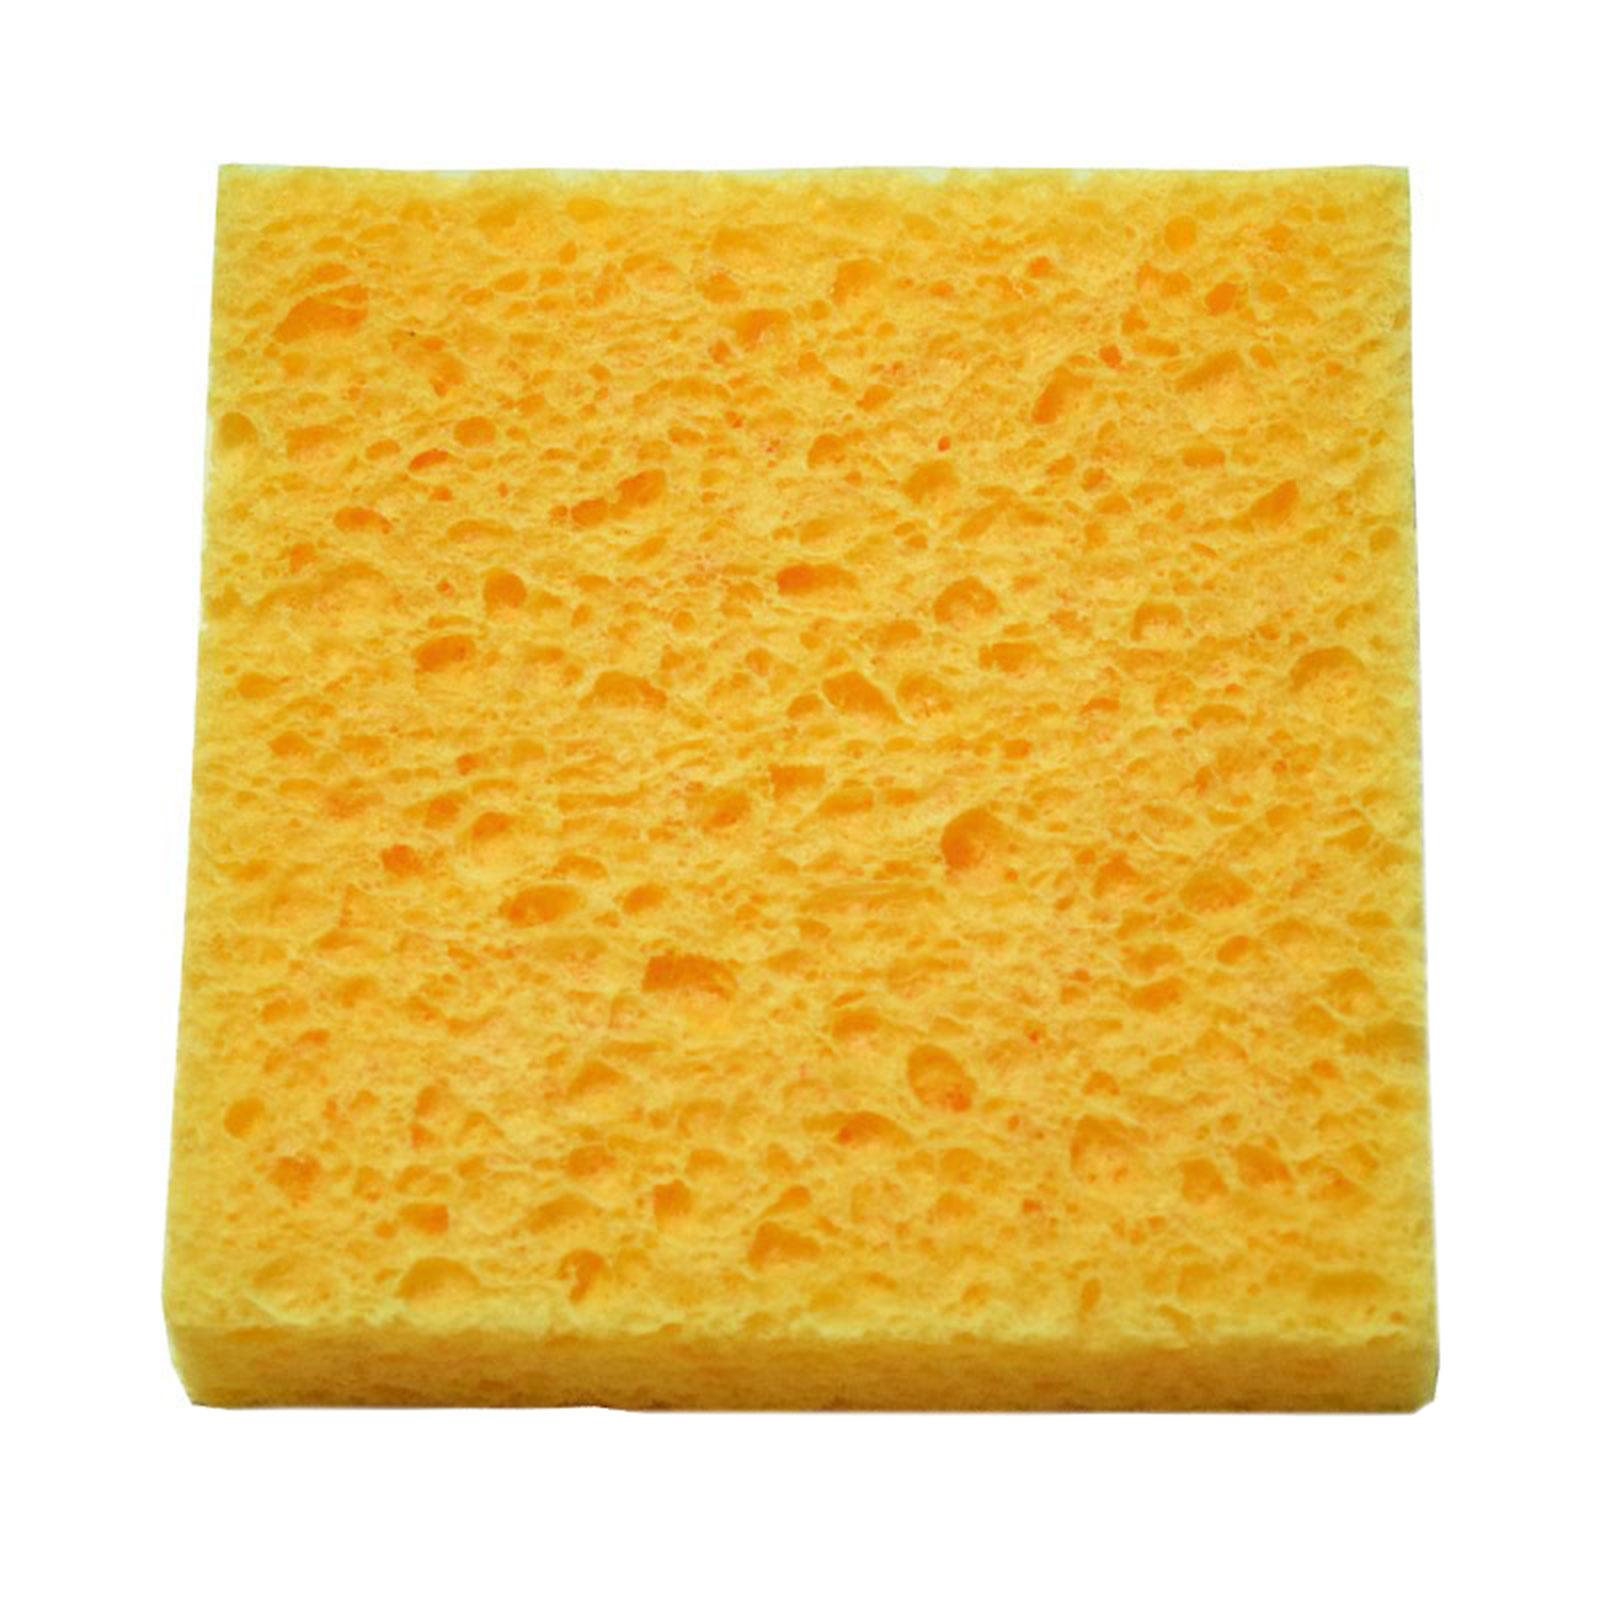 No Holes Solder Sponge For Use With Soldering Irons, Workstands 2.60